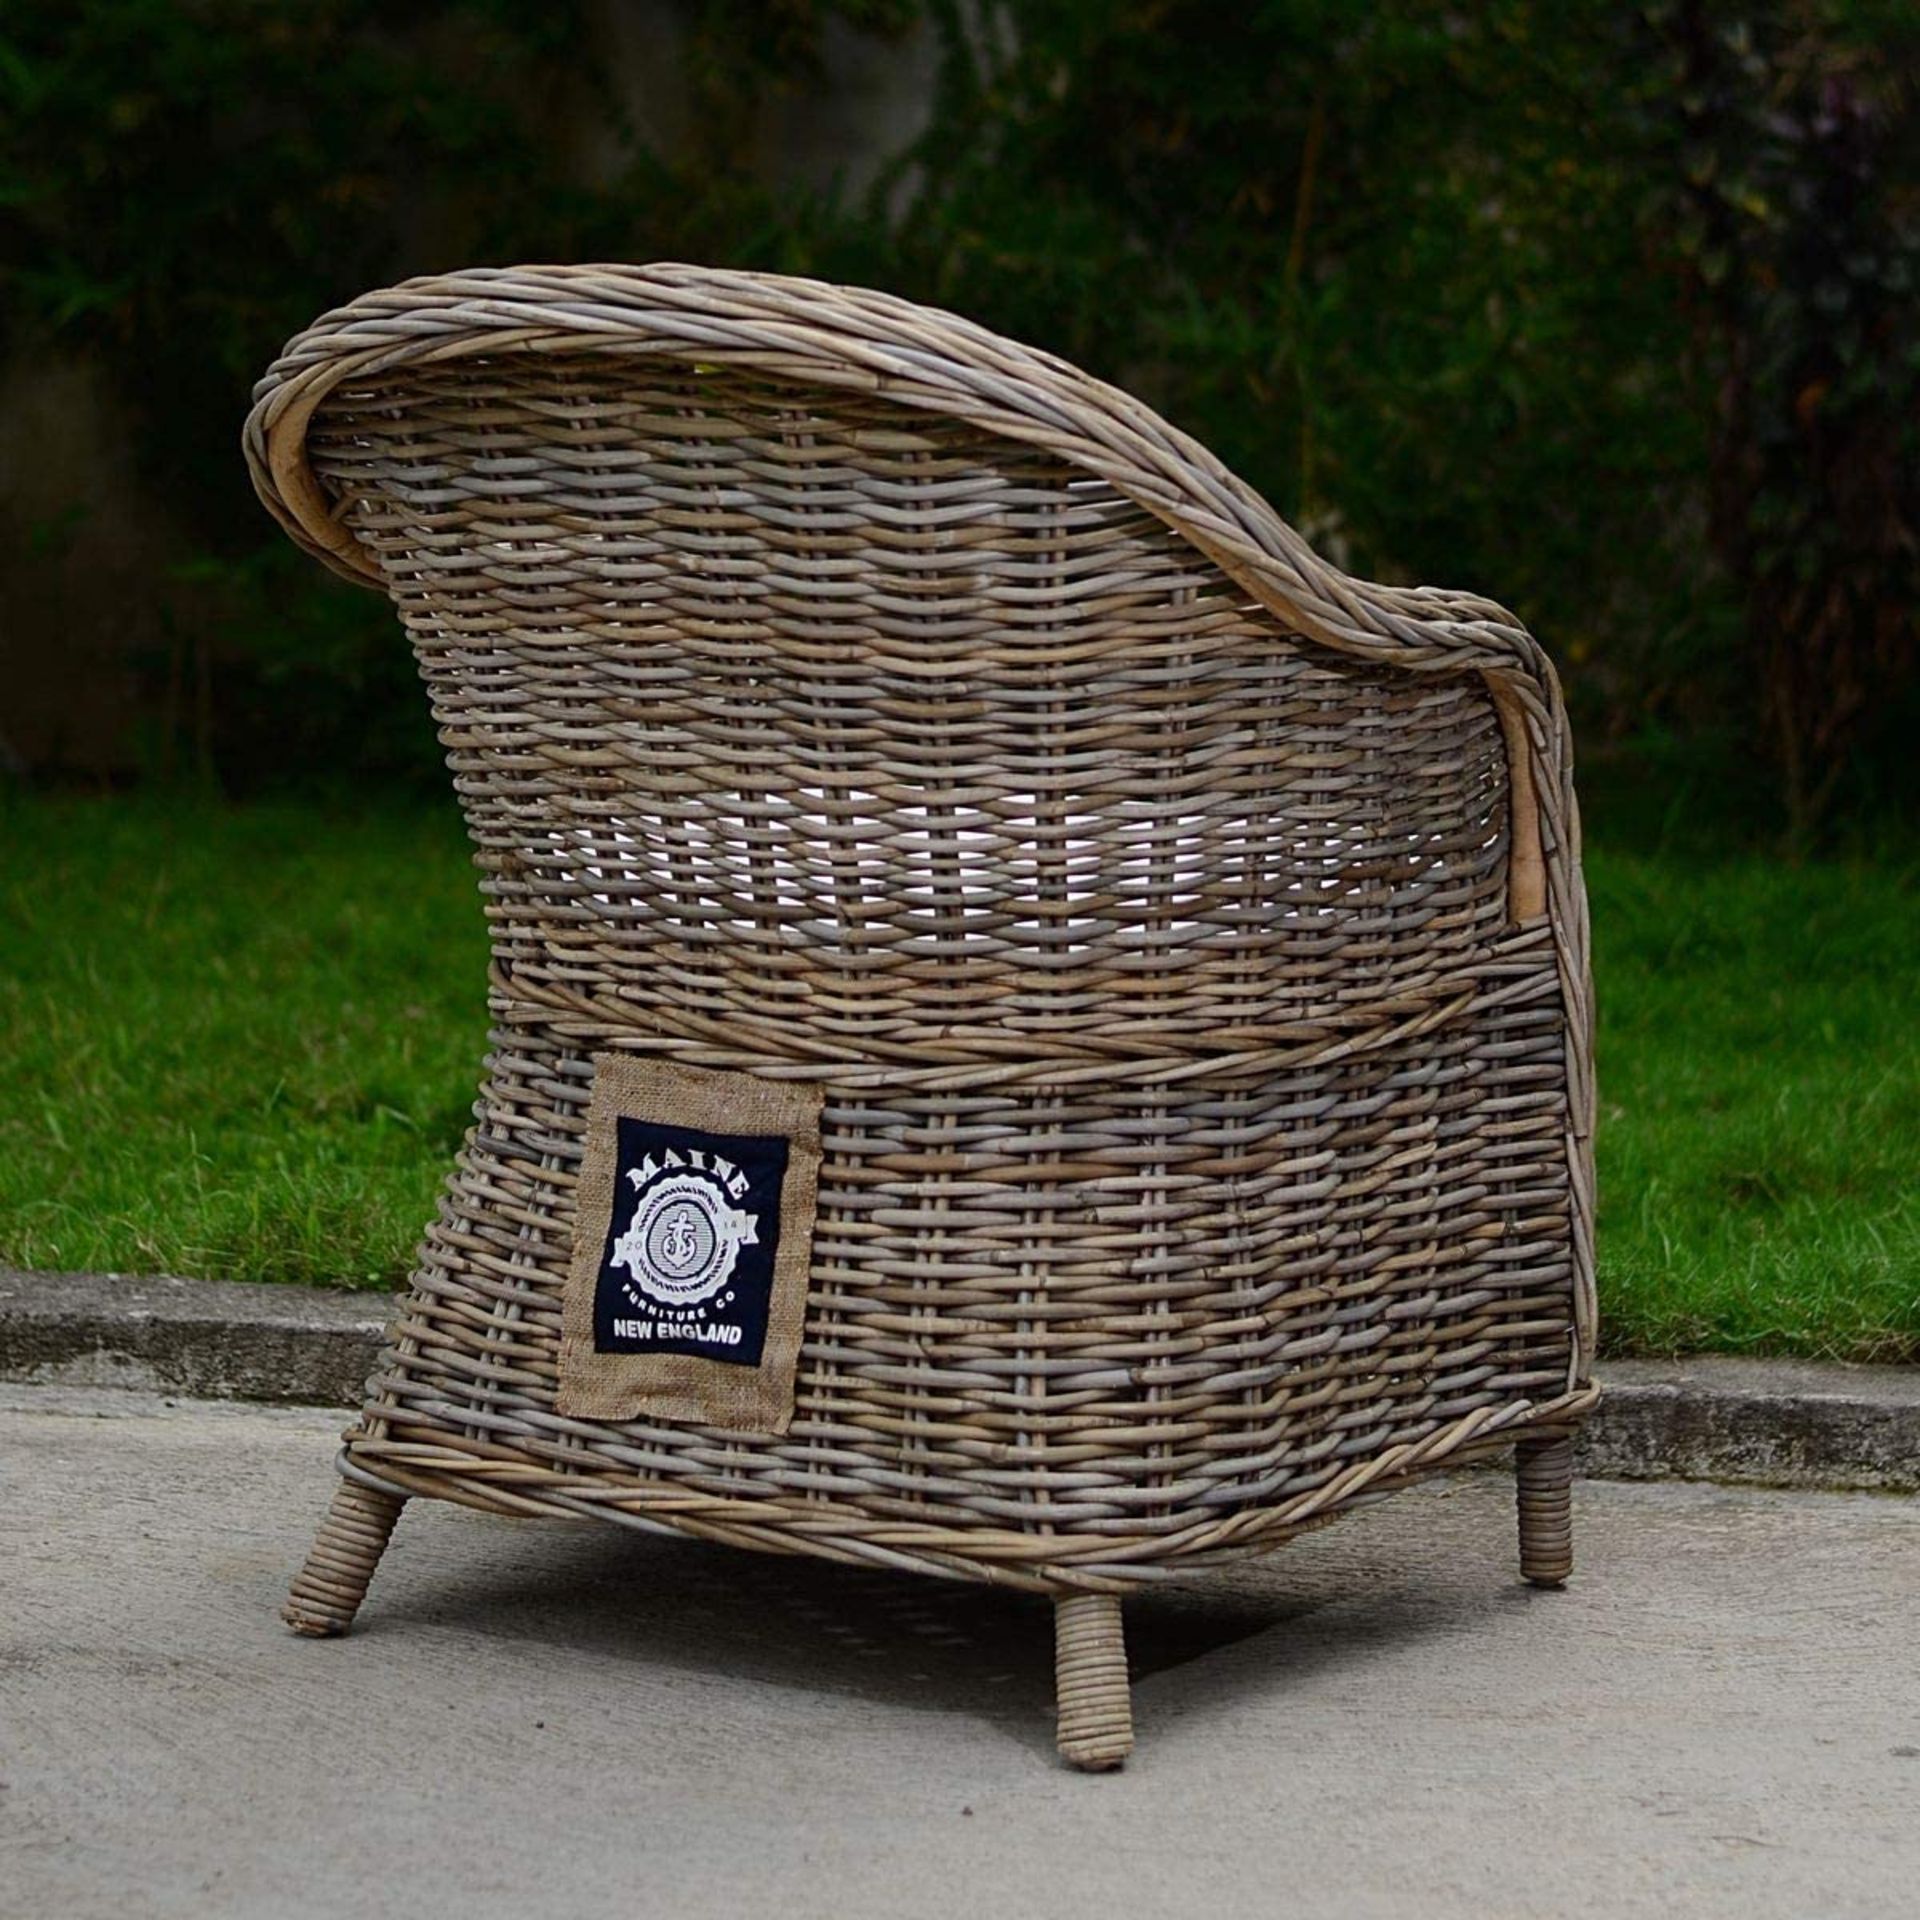 NEW & BOXED 2x Maine Furniture Co. Kubu Rattan Armchair with Cushion. (SR5). (SKU: M500156). STRONG, - Image 5 of 5